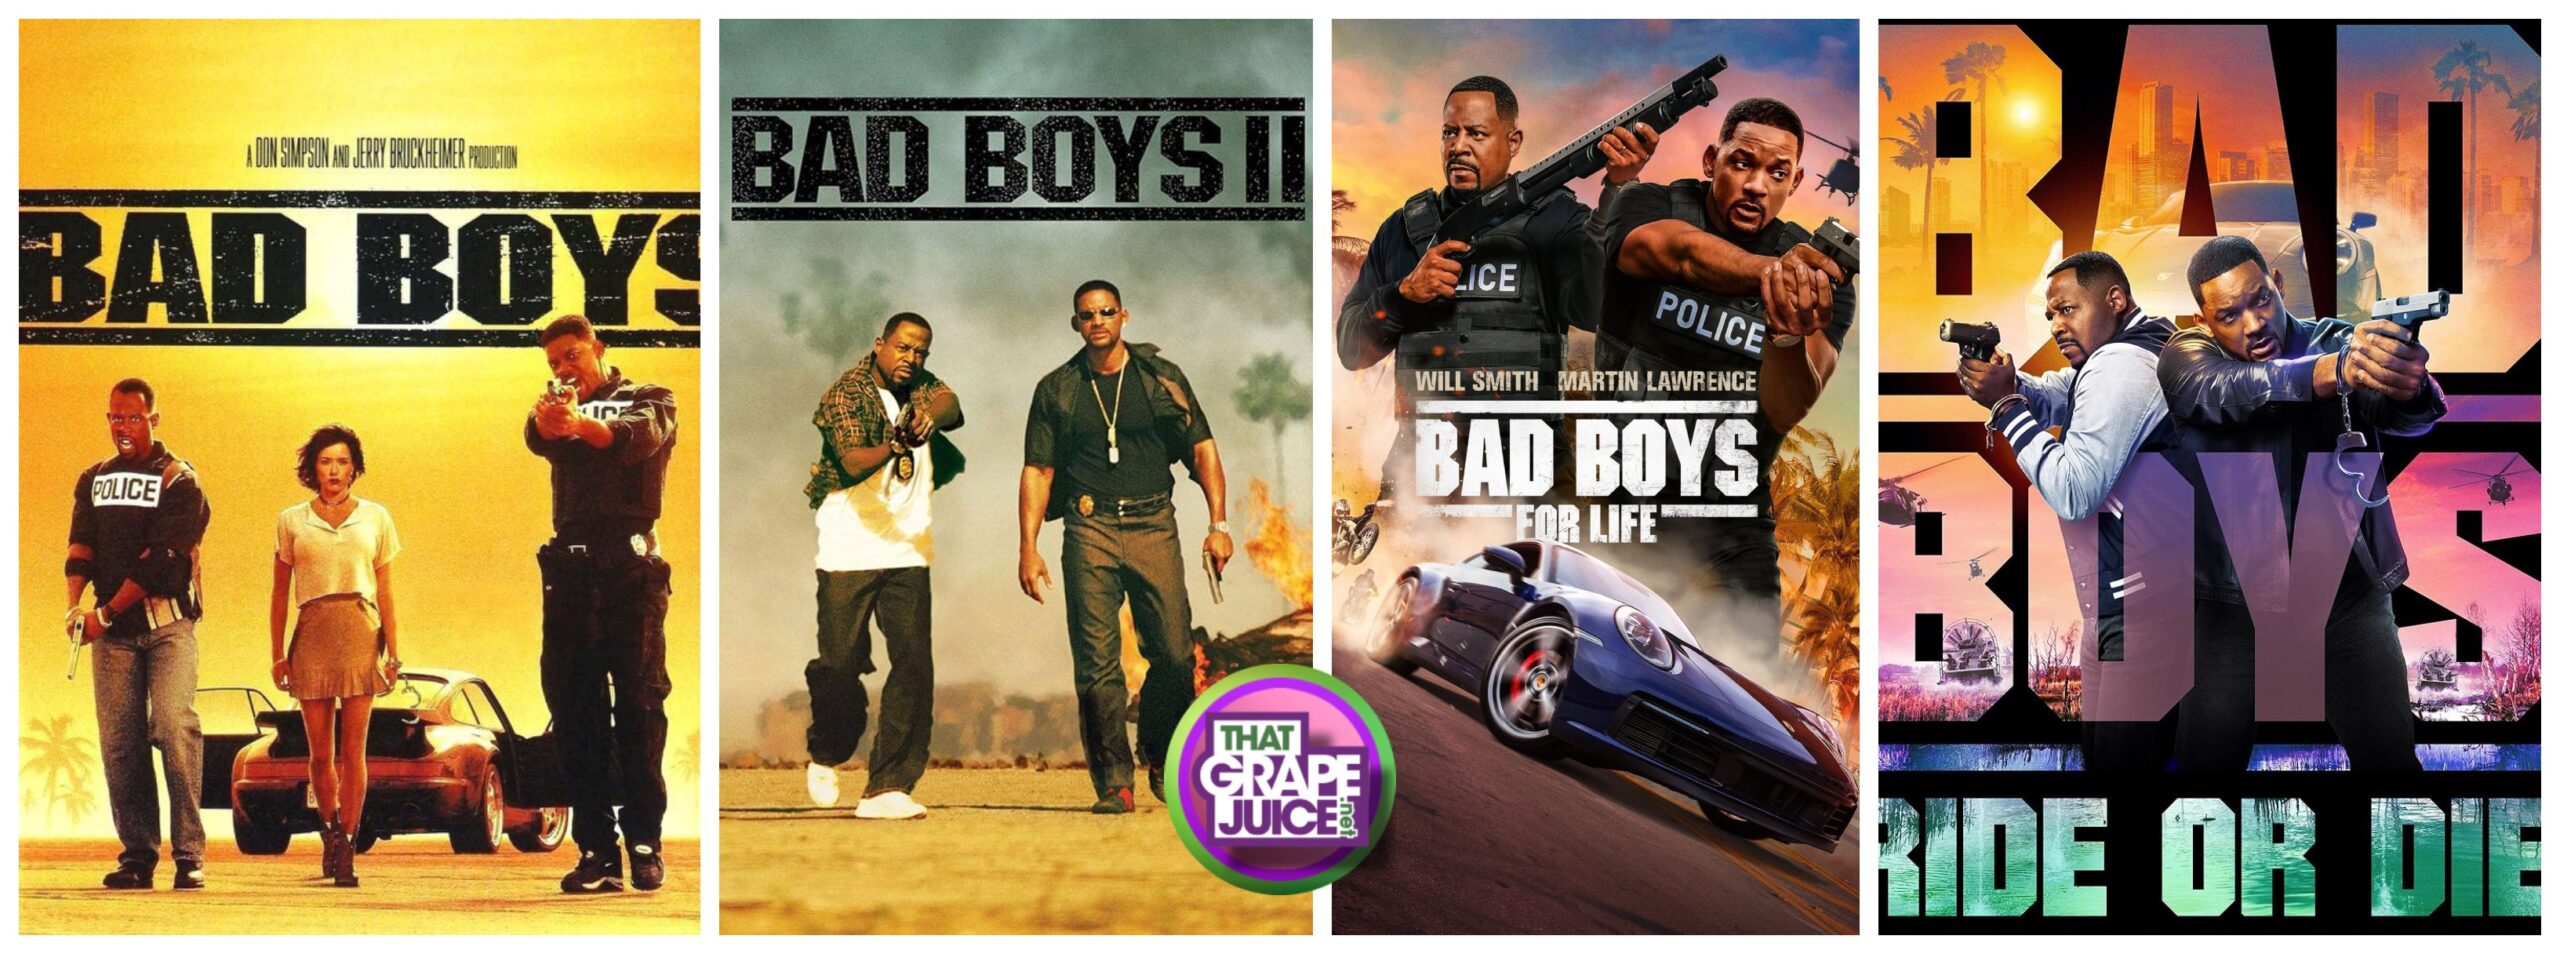 Will Smith & Martin Lawrence’s ‘Bad Boys’ Franchise Hits $1 BILLION at the Global Box Office